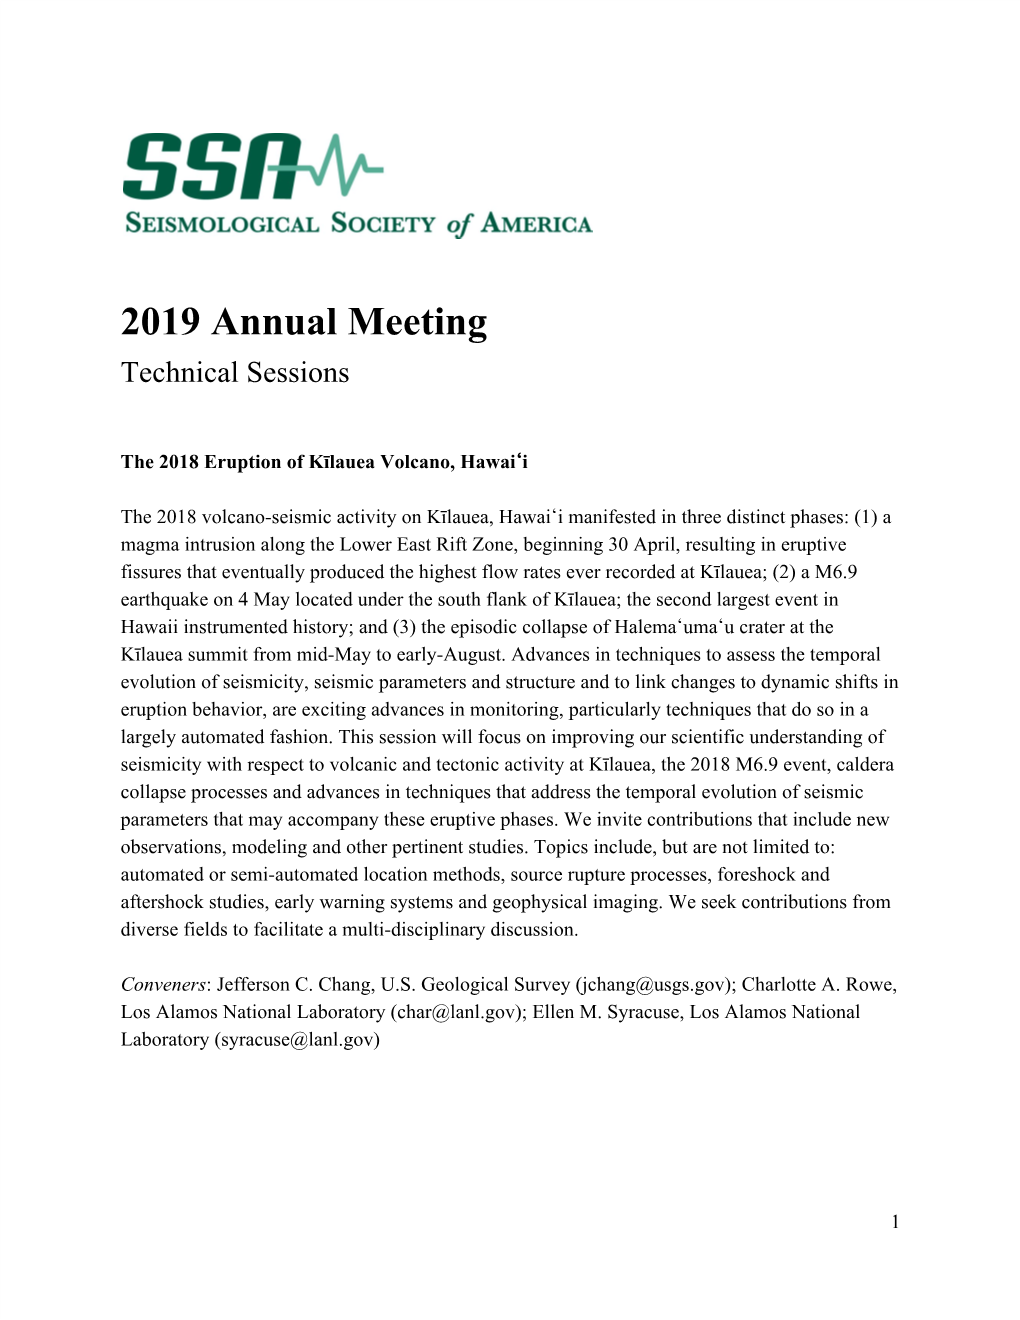 2019 Annual Meeting Technical Sessions